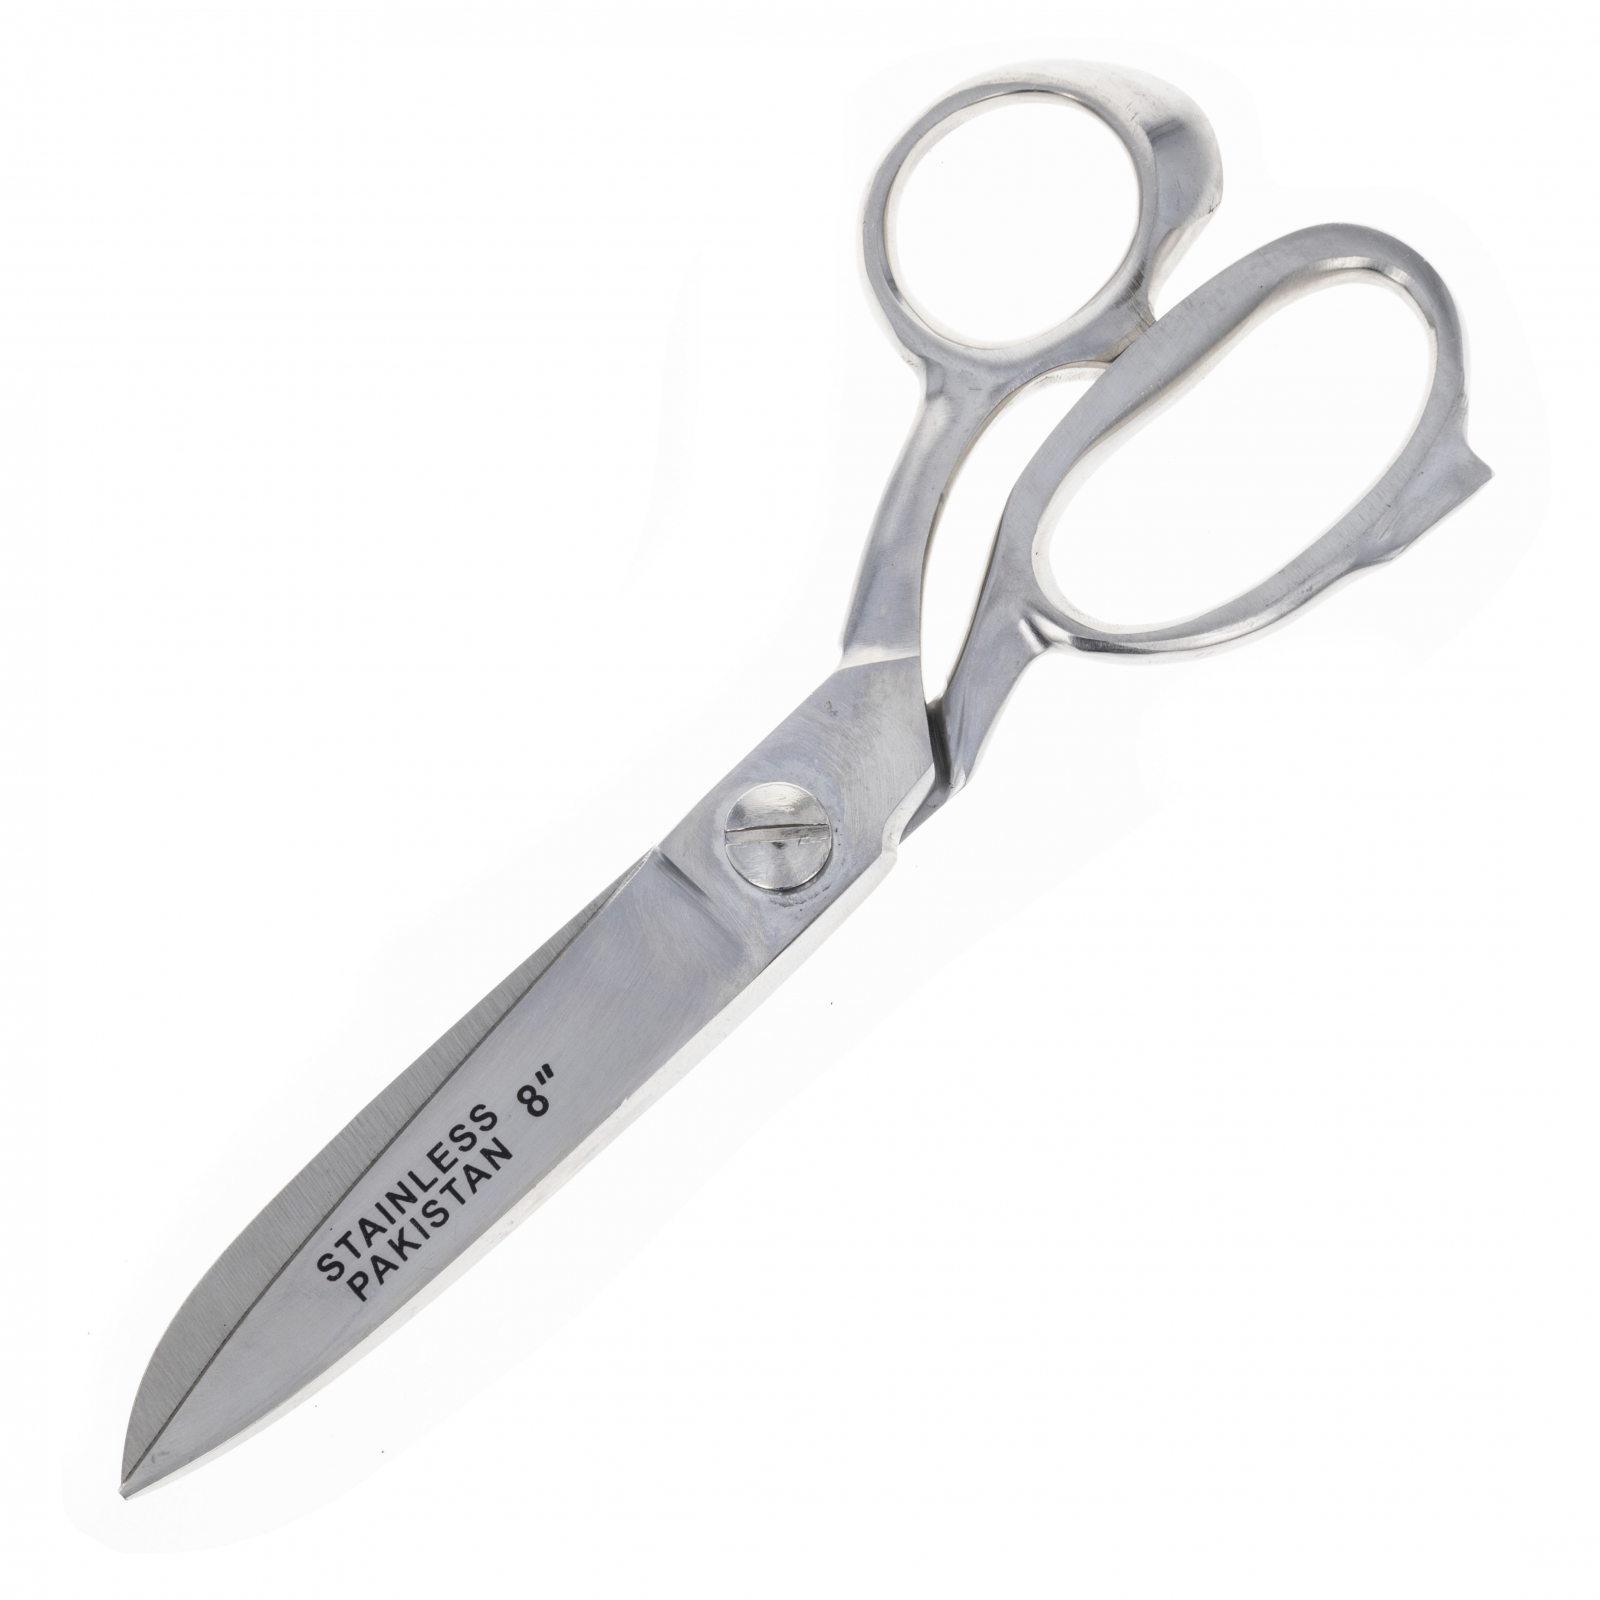 ToolTreaux Stainless Steel Heavy Duty Fabric Scissors Sewing Supplies, 8 Inch